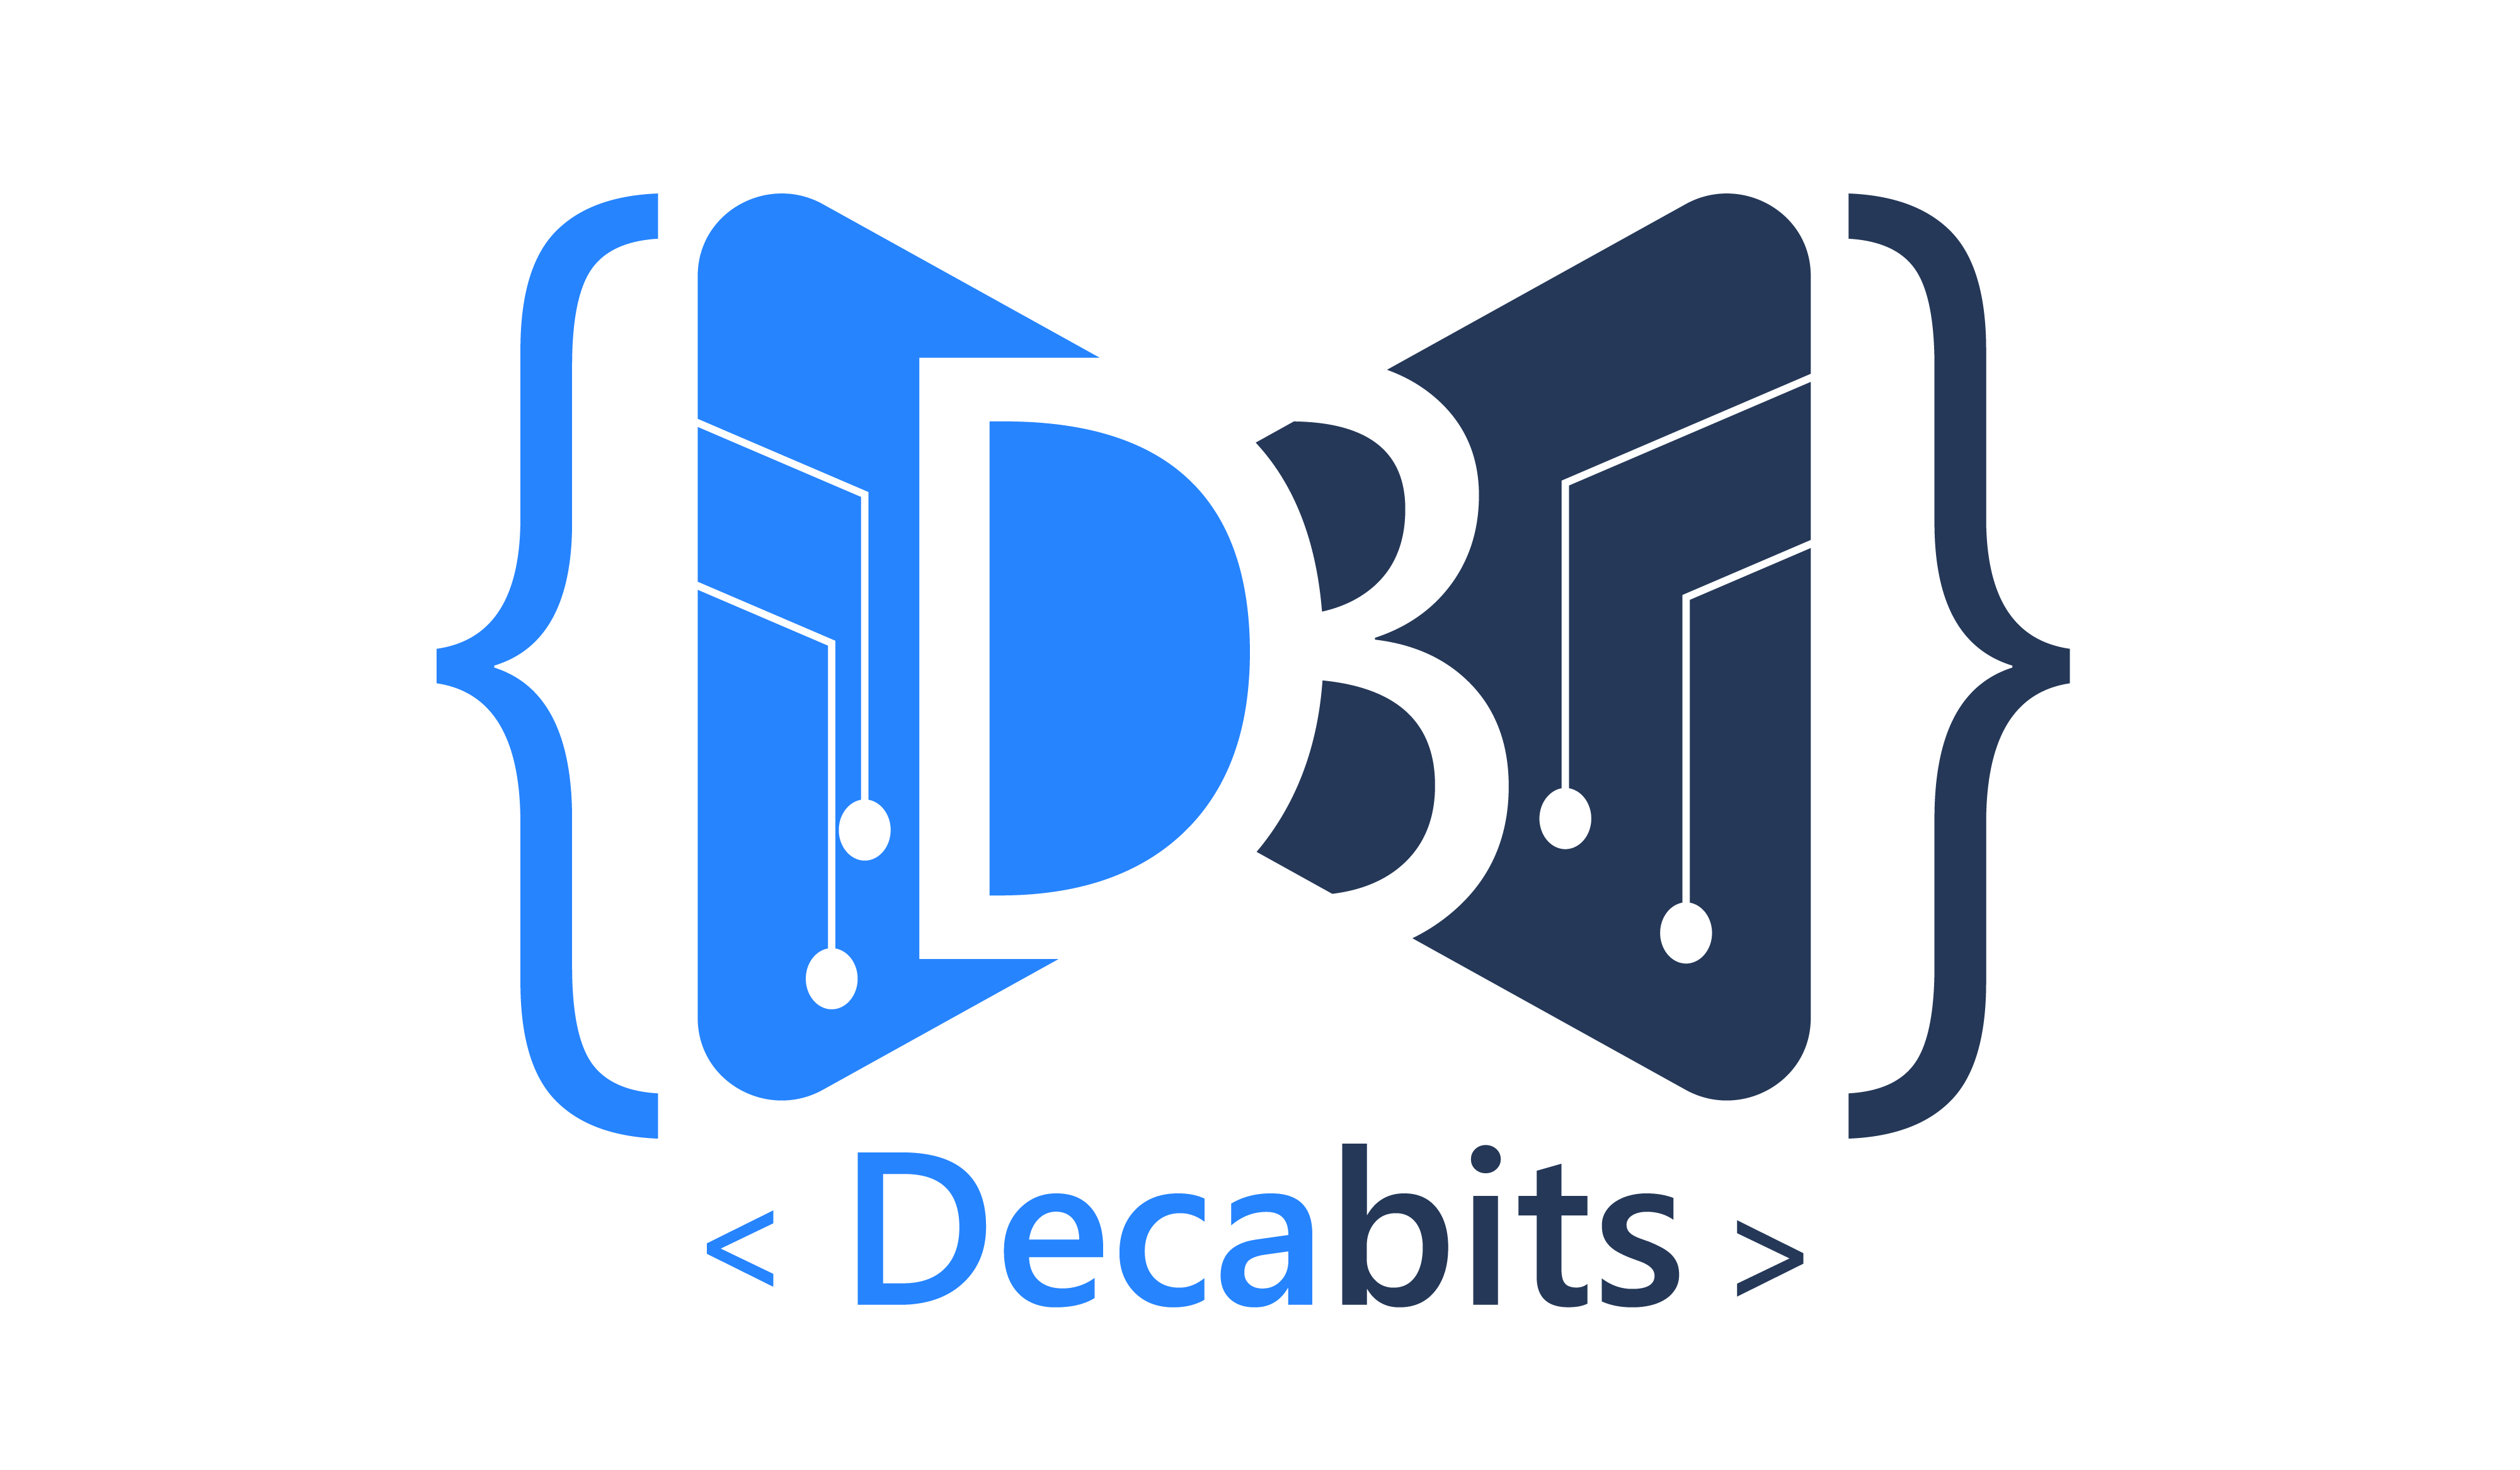 Decabits Software profile on Qualified.One